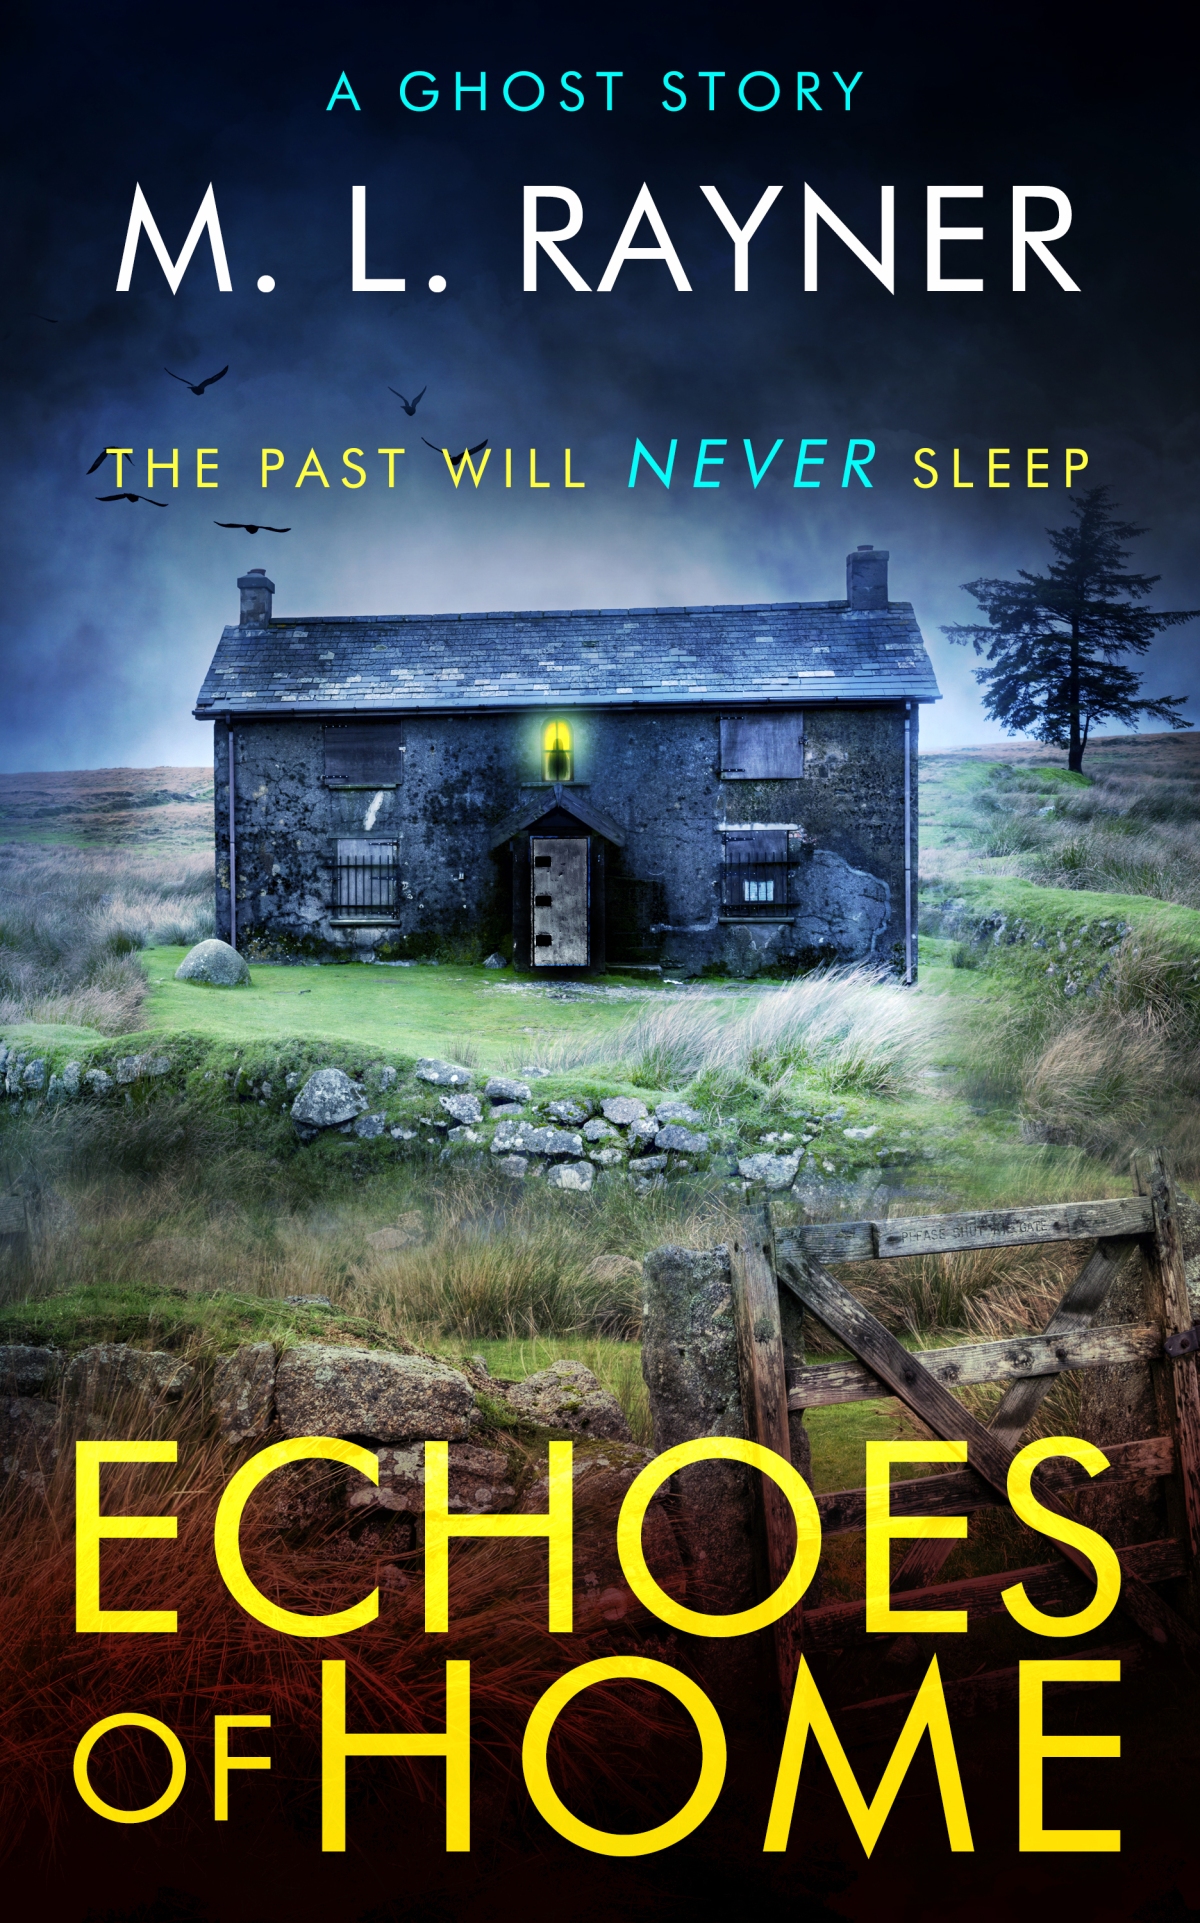 #EchoesofHome by M.L. Rayner @M_L_Rayner @QuestionPress @zooloo2008 #QuestionMarkPress #ZooloosBookTours